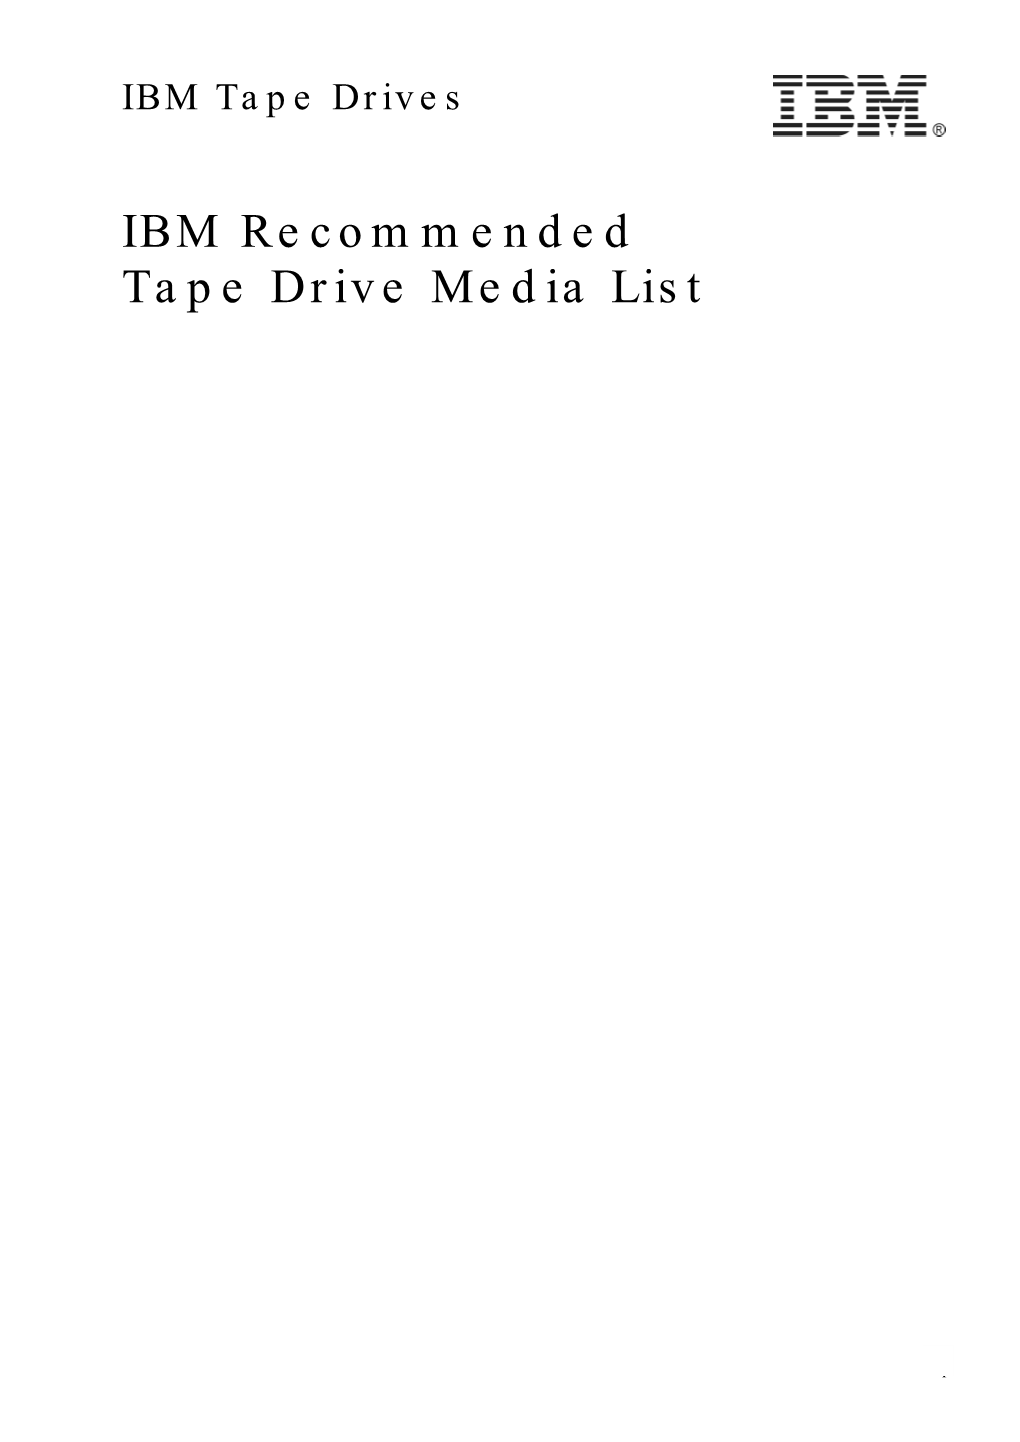 IBM Recommended Tape Drive Media List